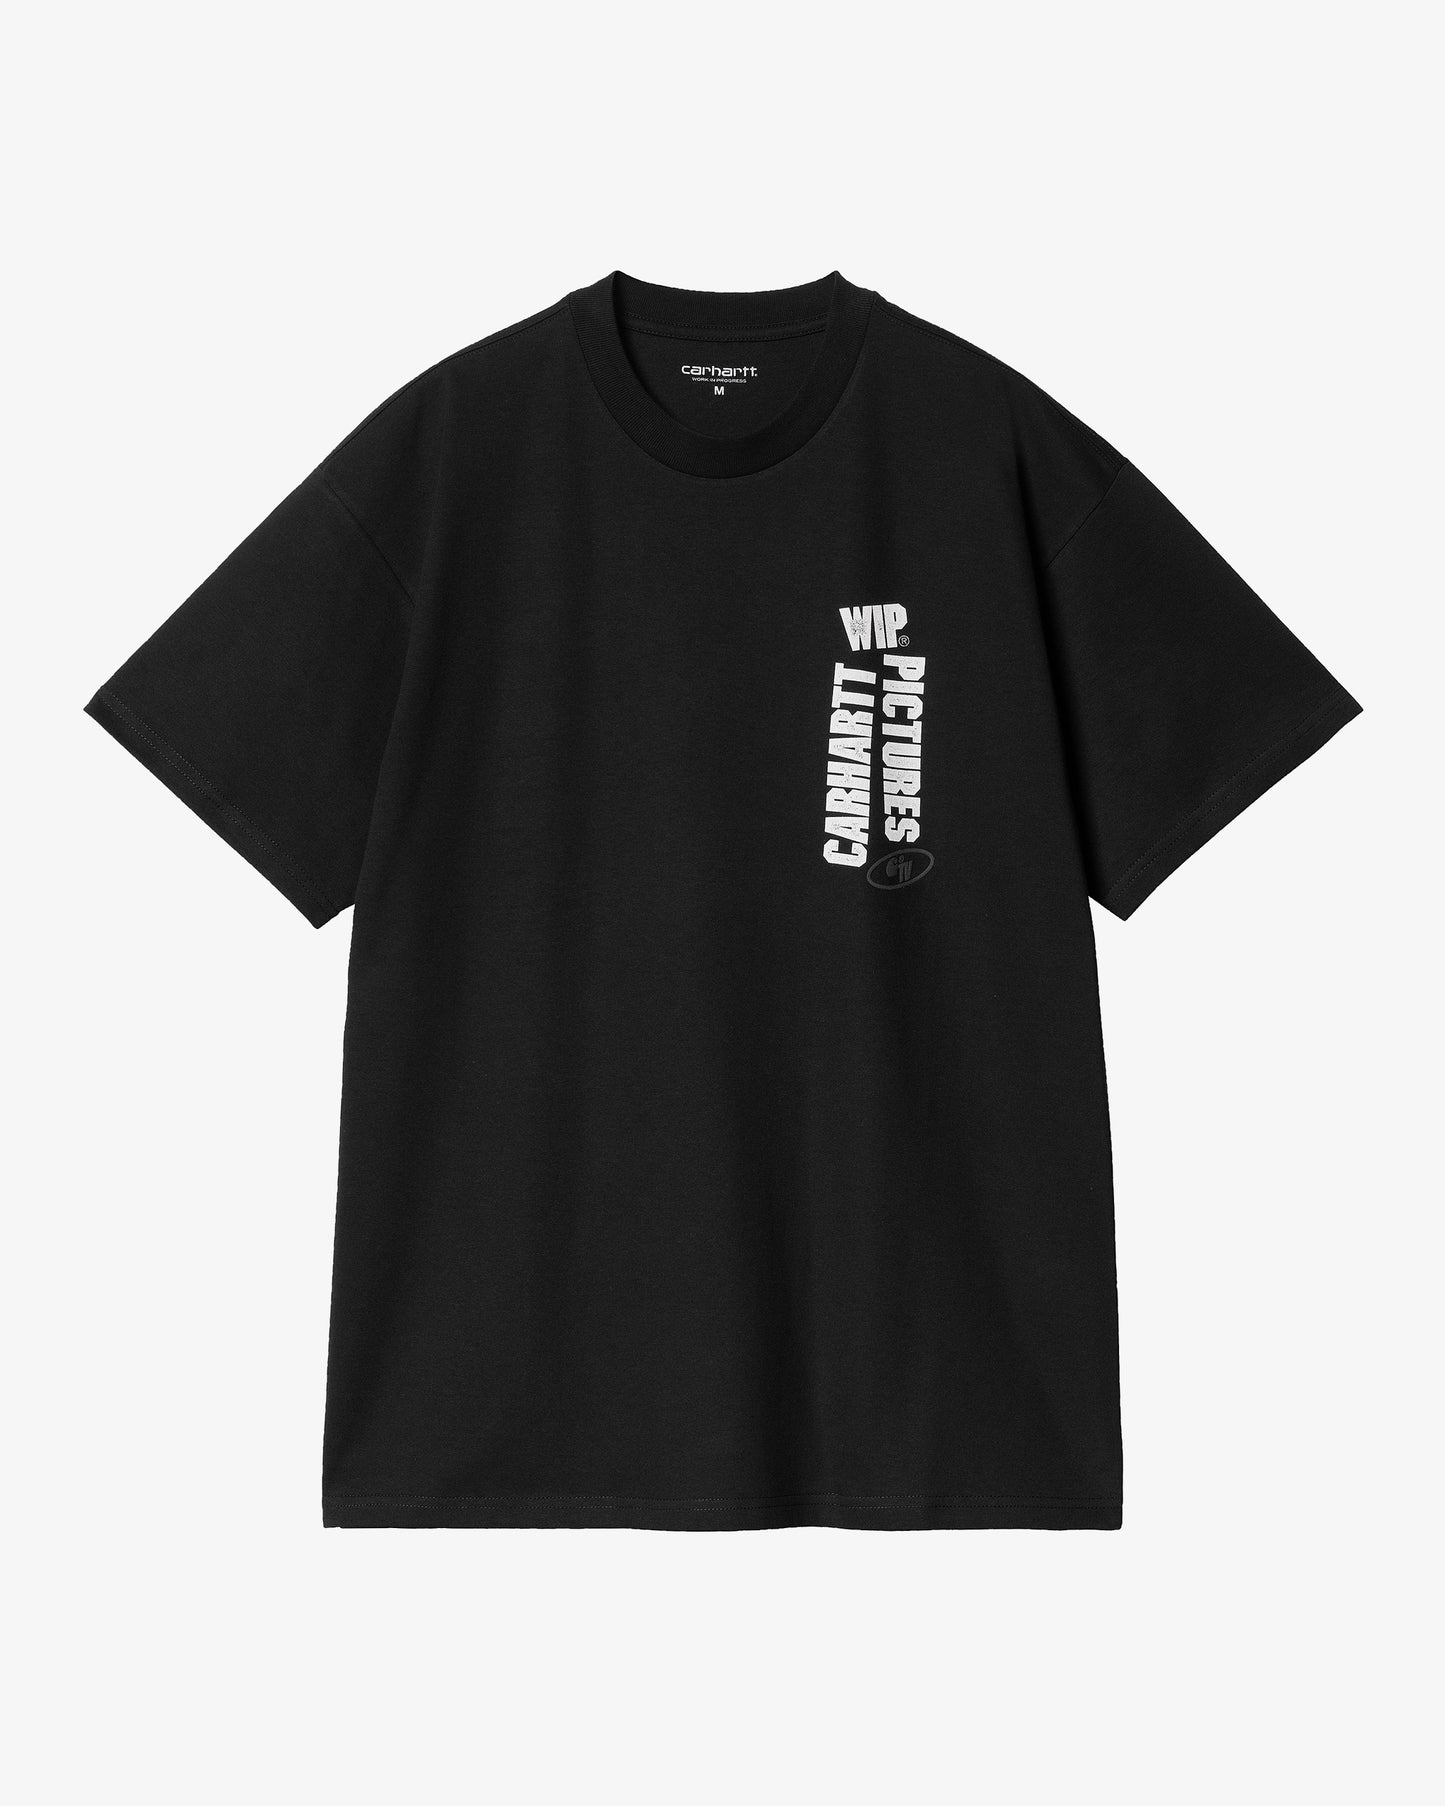 Carhartt WIP S/S Wip Pictures T-Shirt